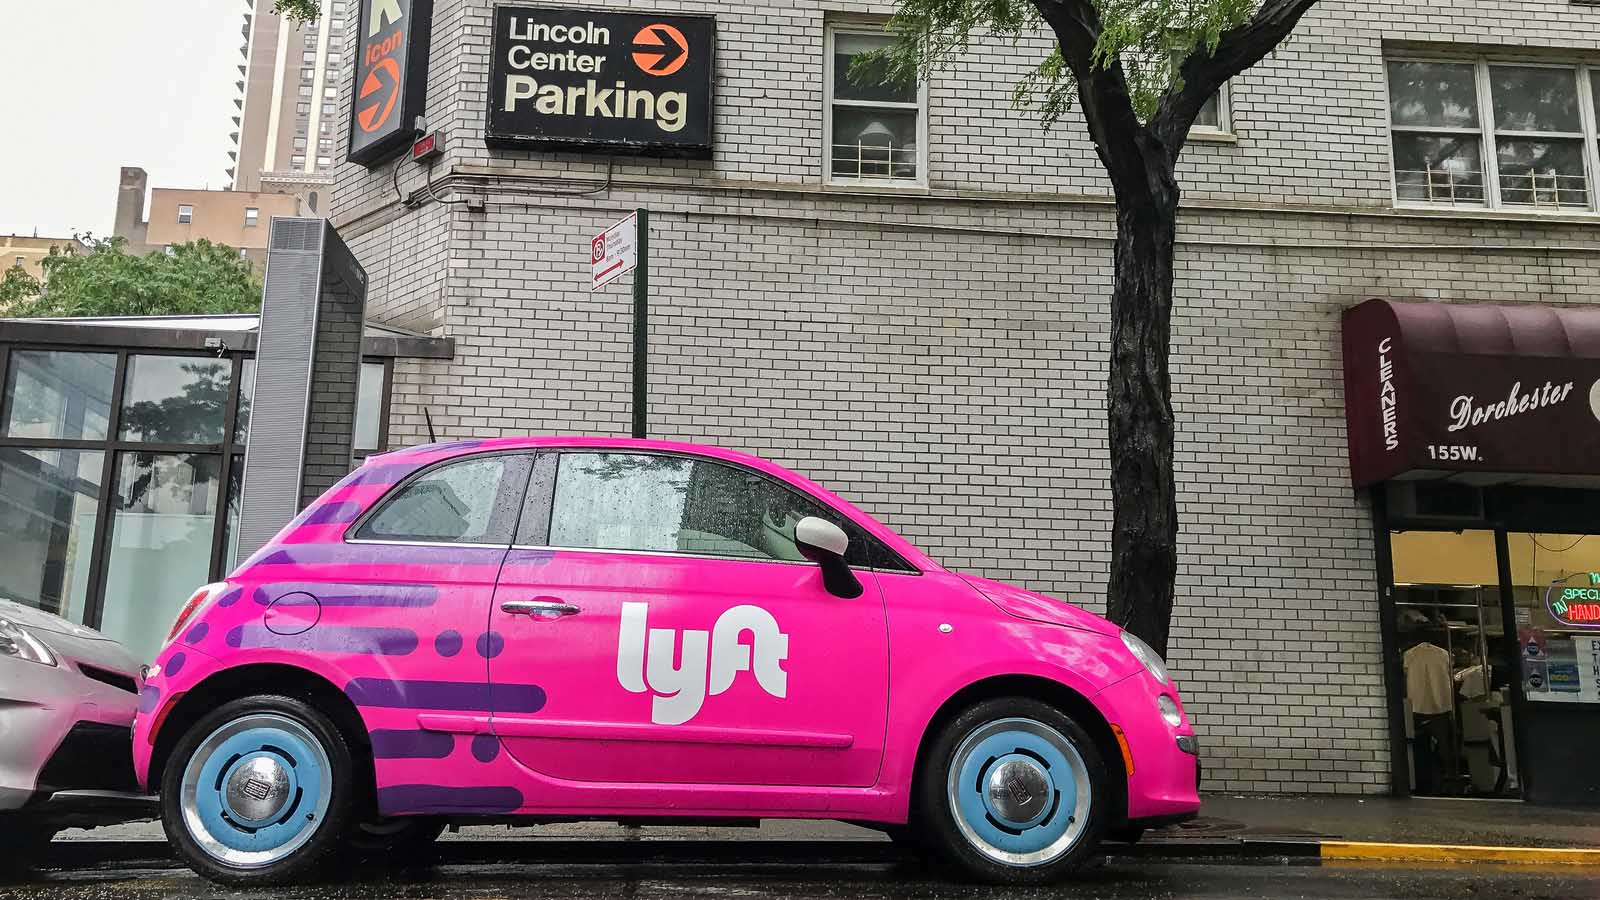 The Lyft (LYFT Stock) logo on the side of a pink car parked on a street.